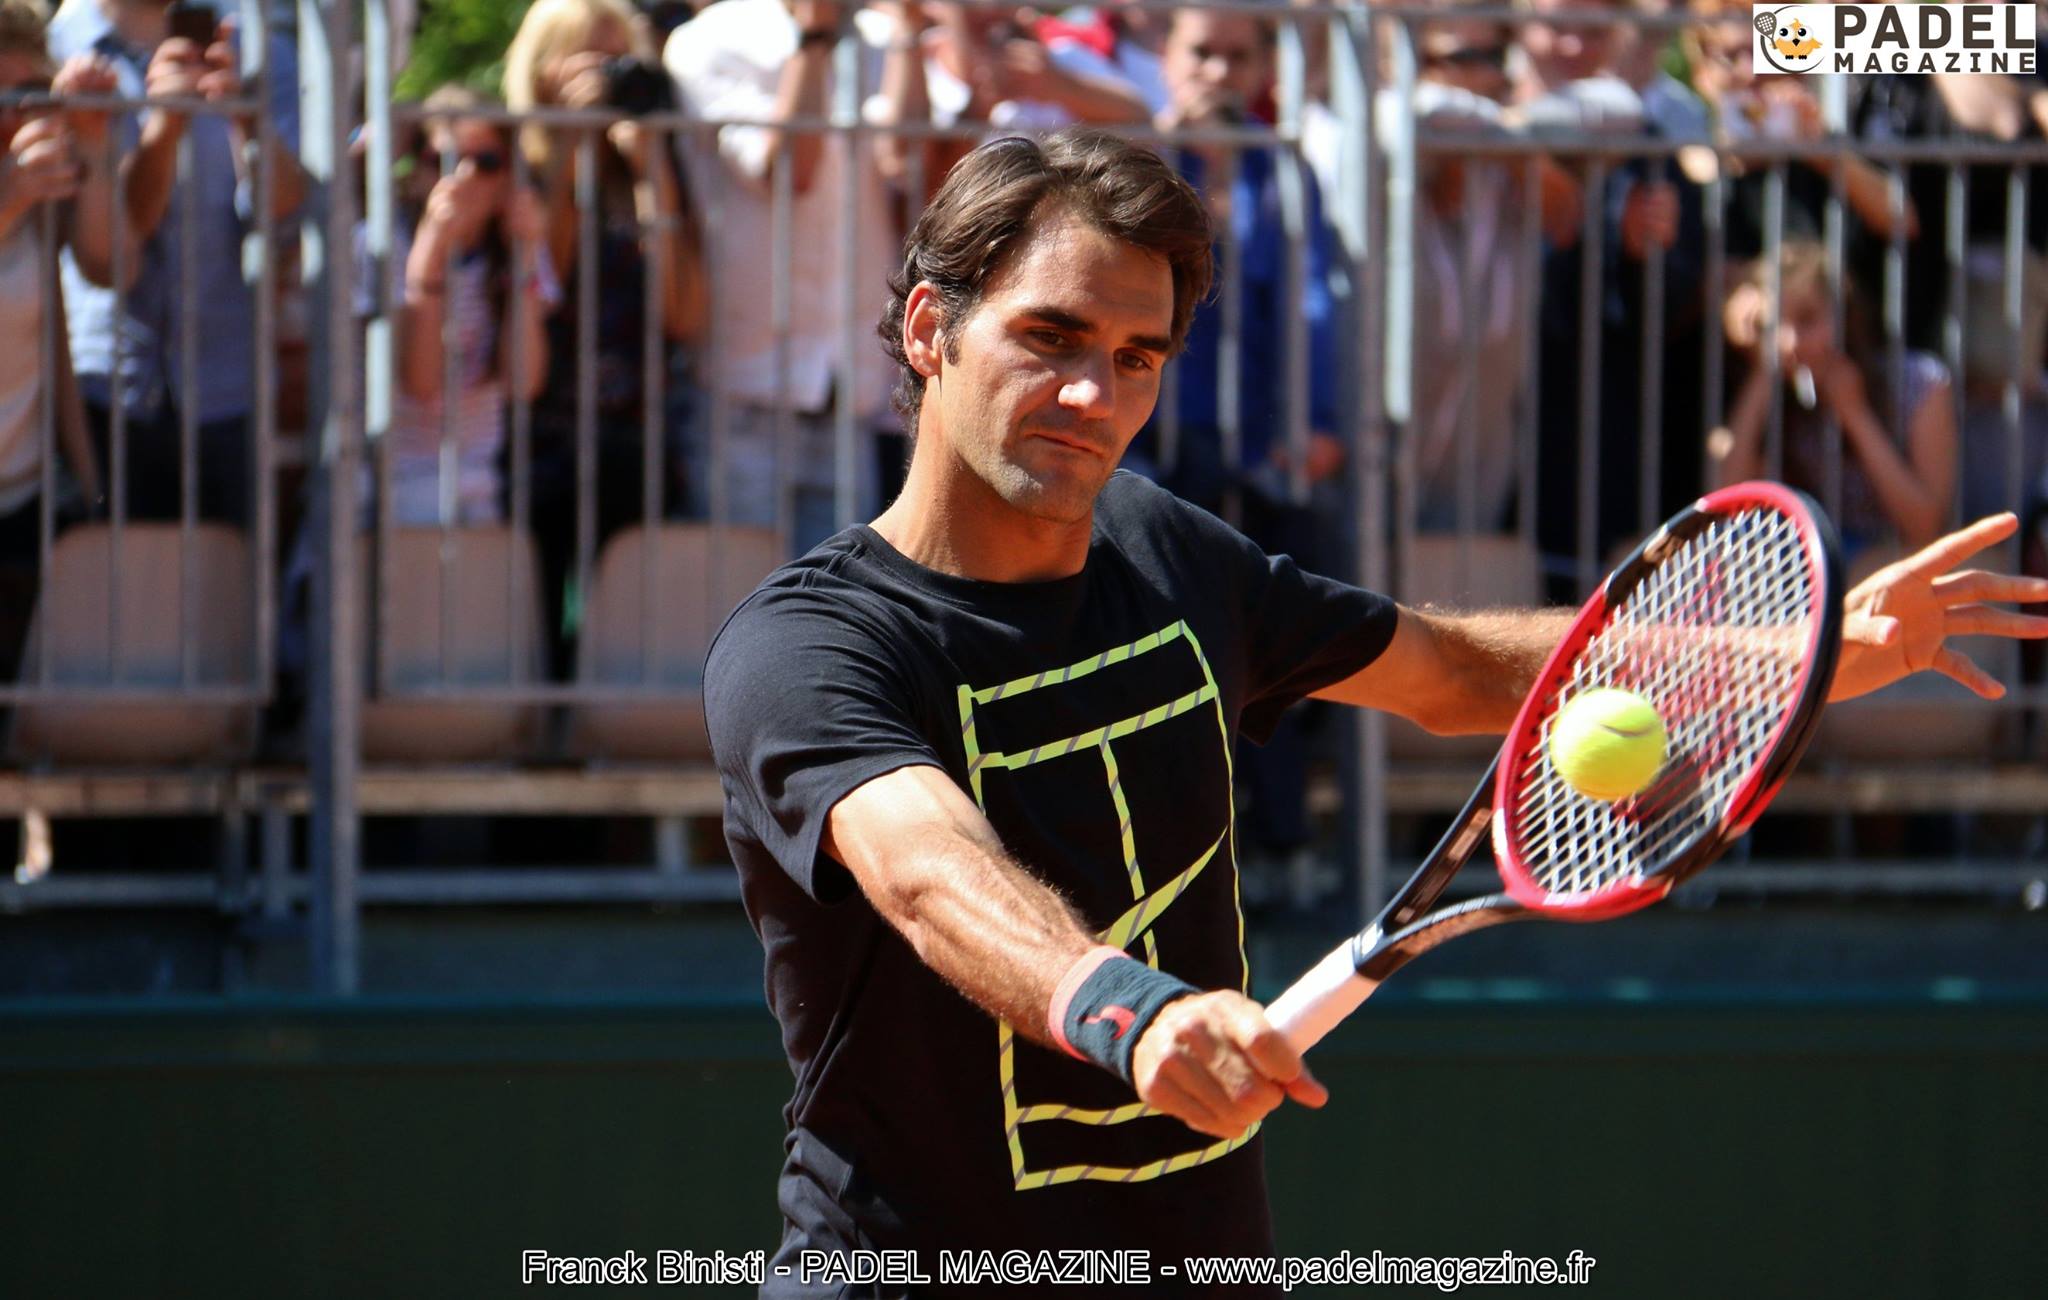 Roger Federer at padel : dream or future reality?